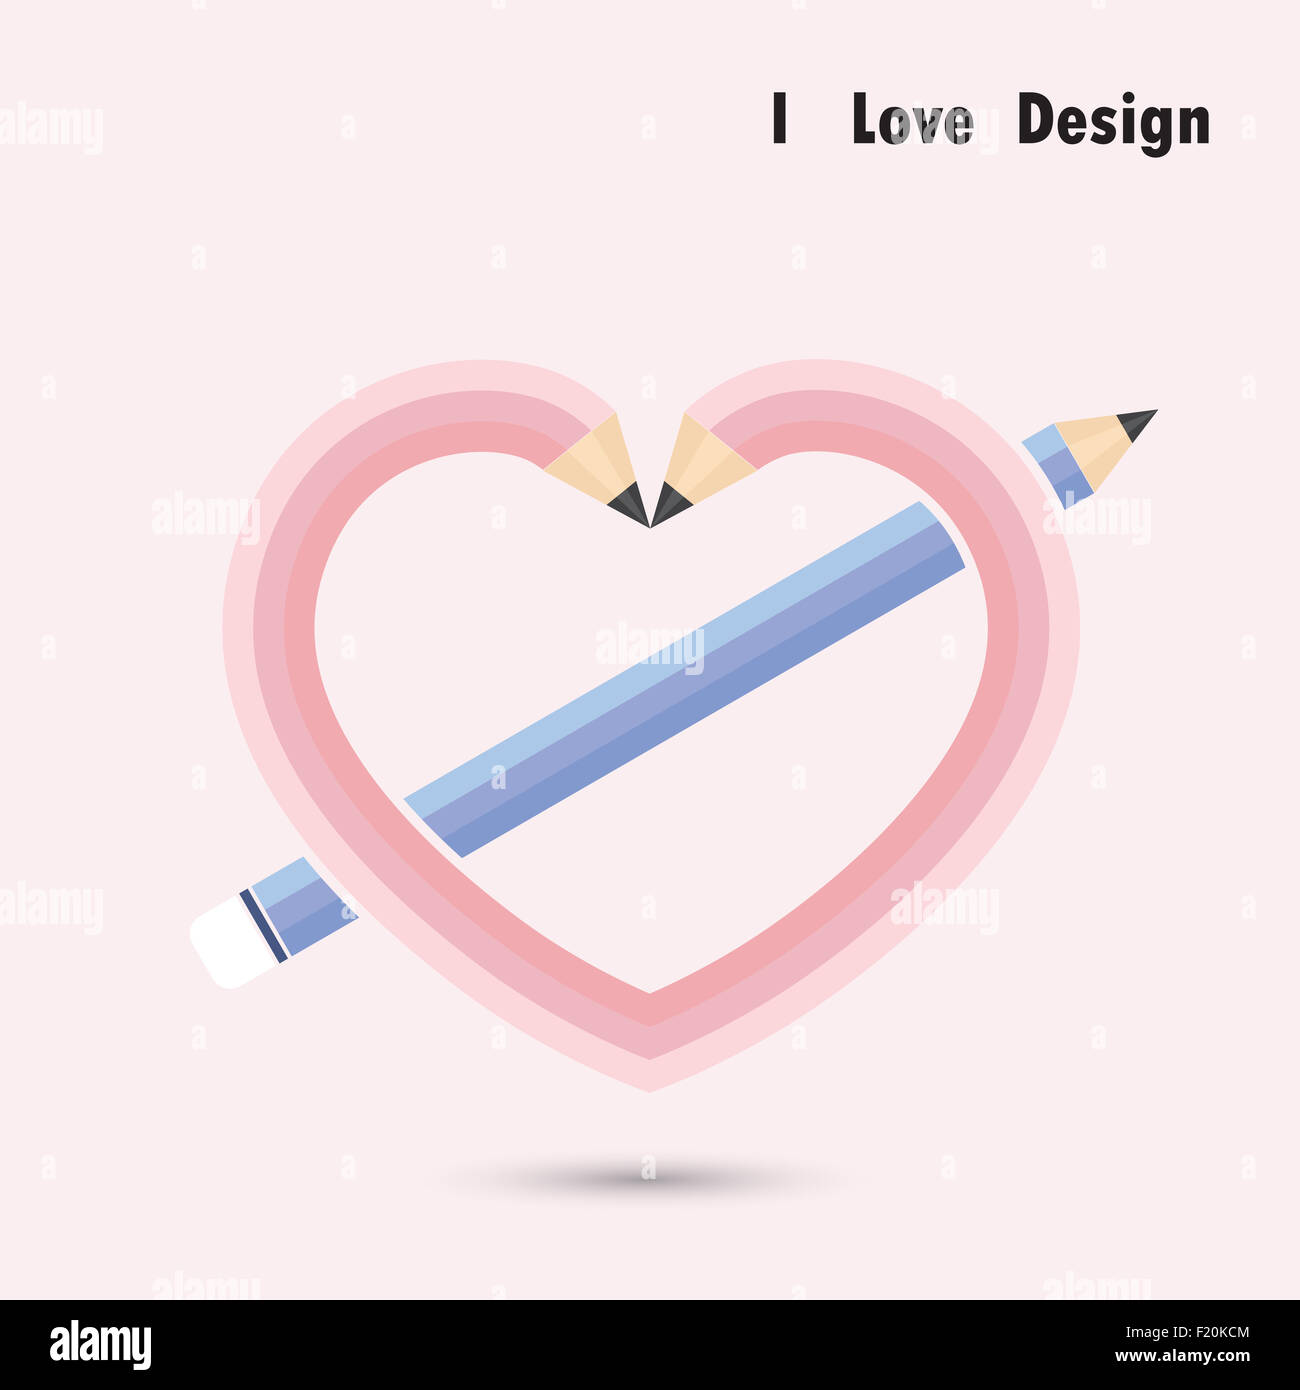 Pencil heart shape with I love design concept. Education and business concept. Stock Photo